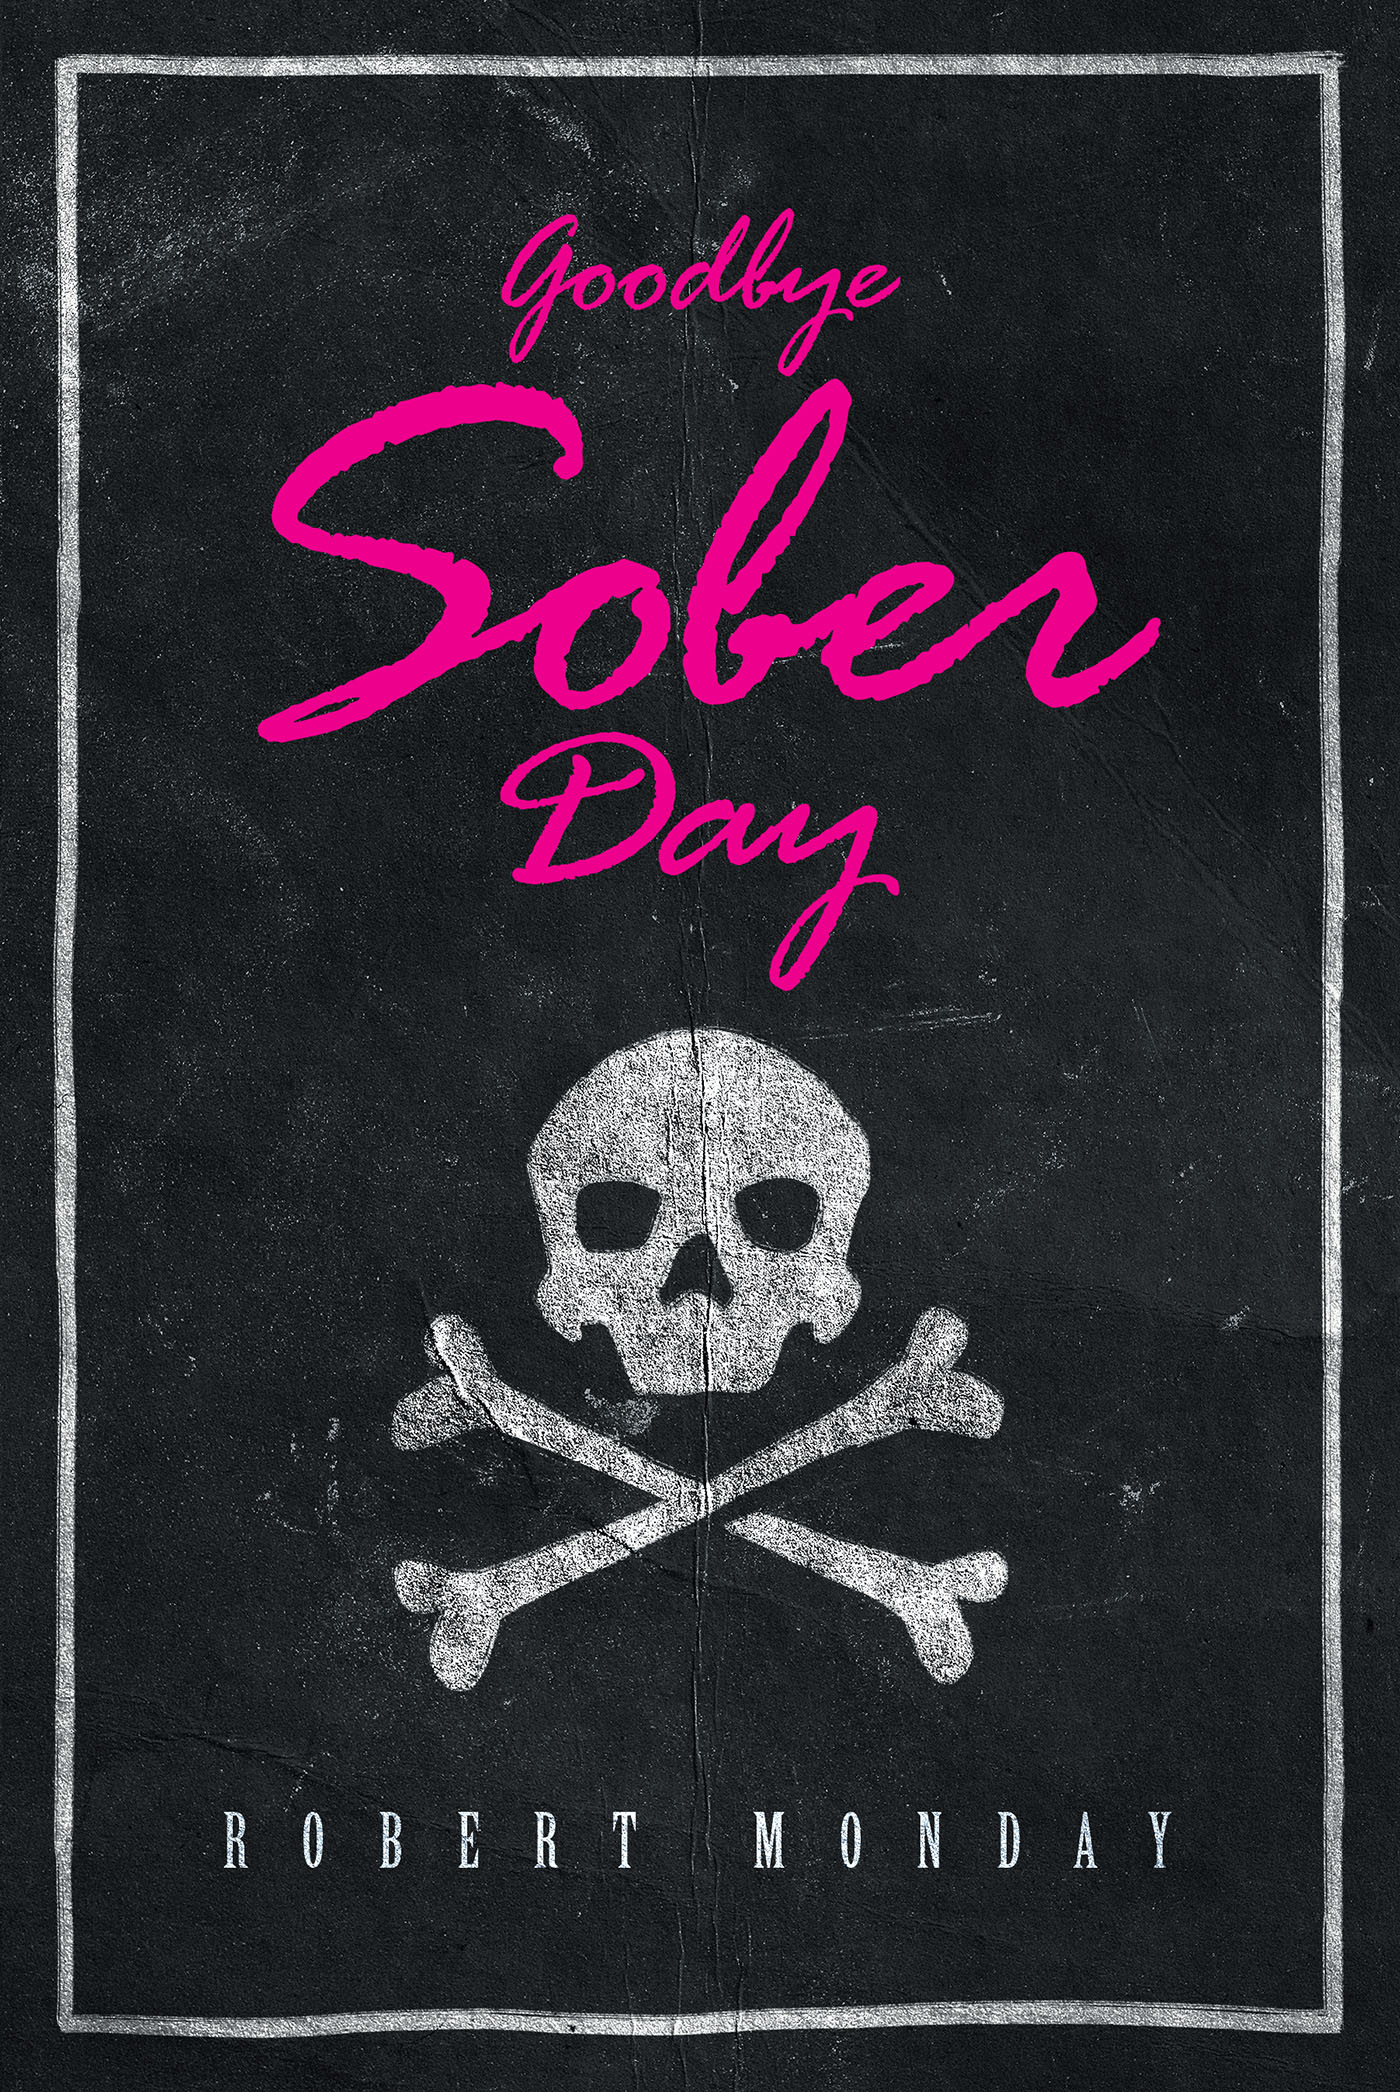 Author Robert Monday’s New Book, "Goodbye Sober Day," is a Last Hurrah of a Rock Band in the Face of Y2K